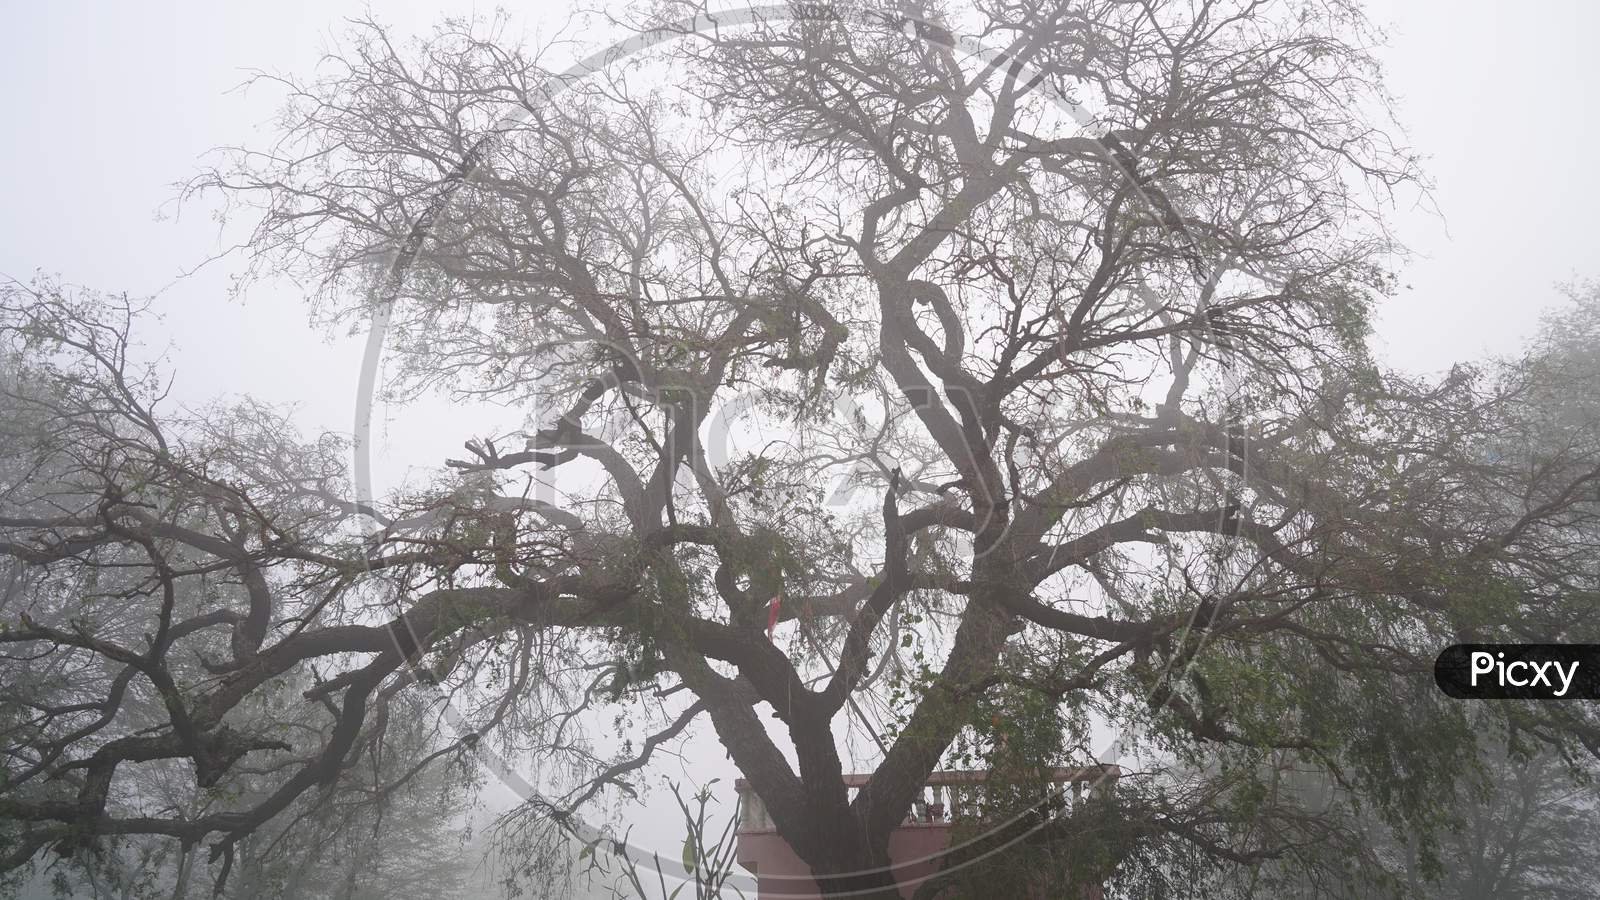 Desert Tree Branches In Cold Foggy Mist. Dramatic Sky With Old Mysterious Tree.